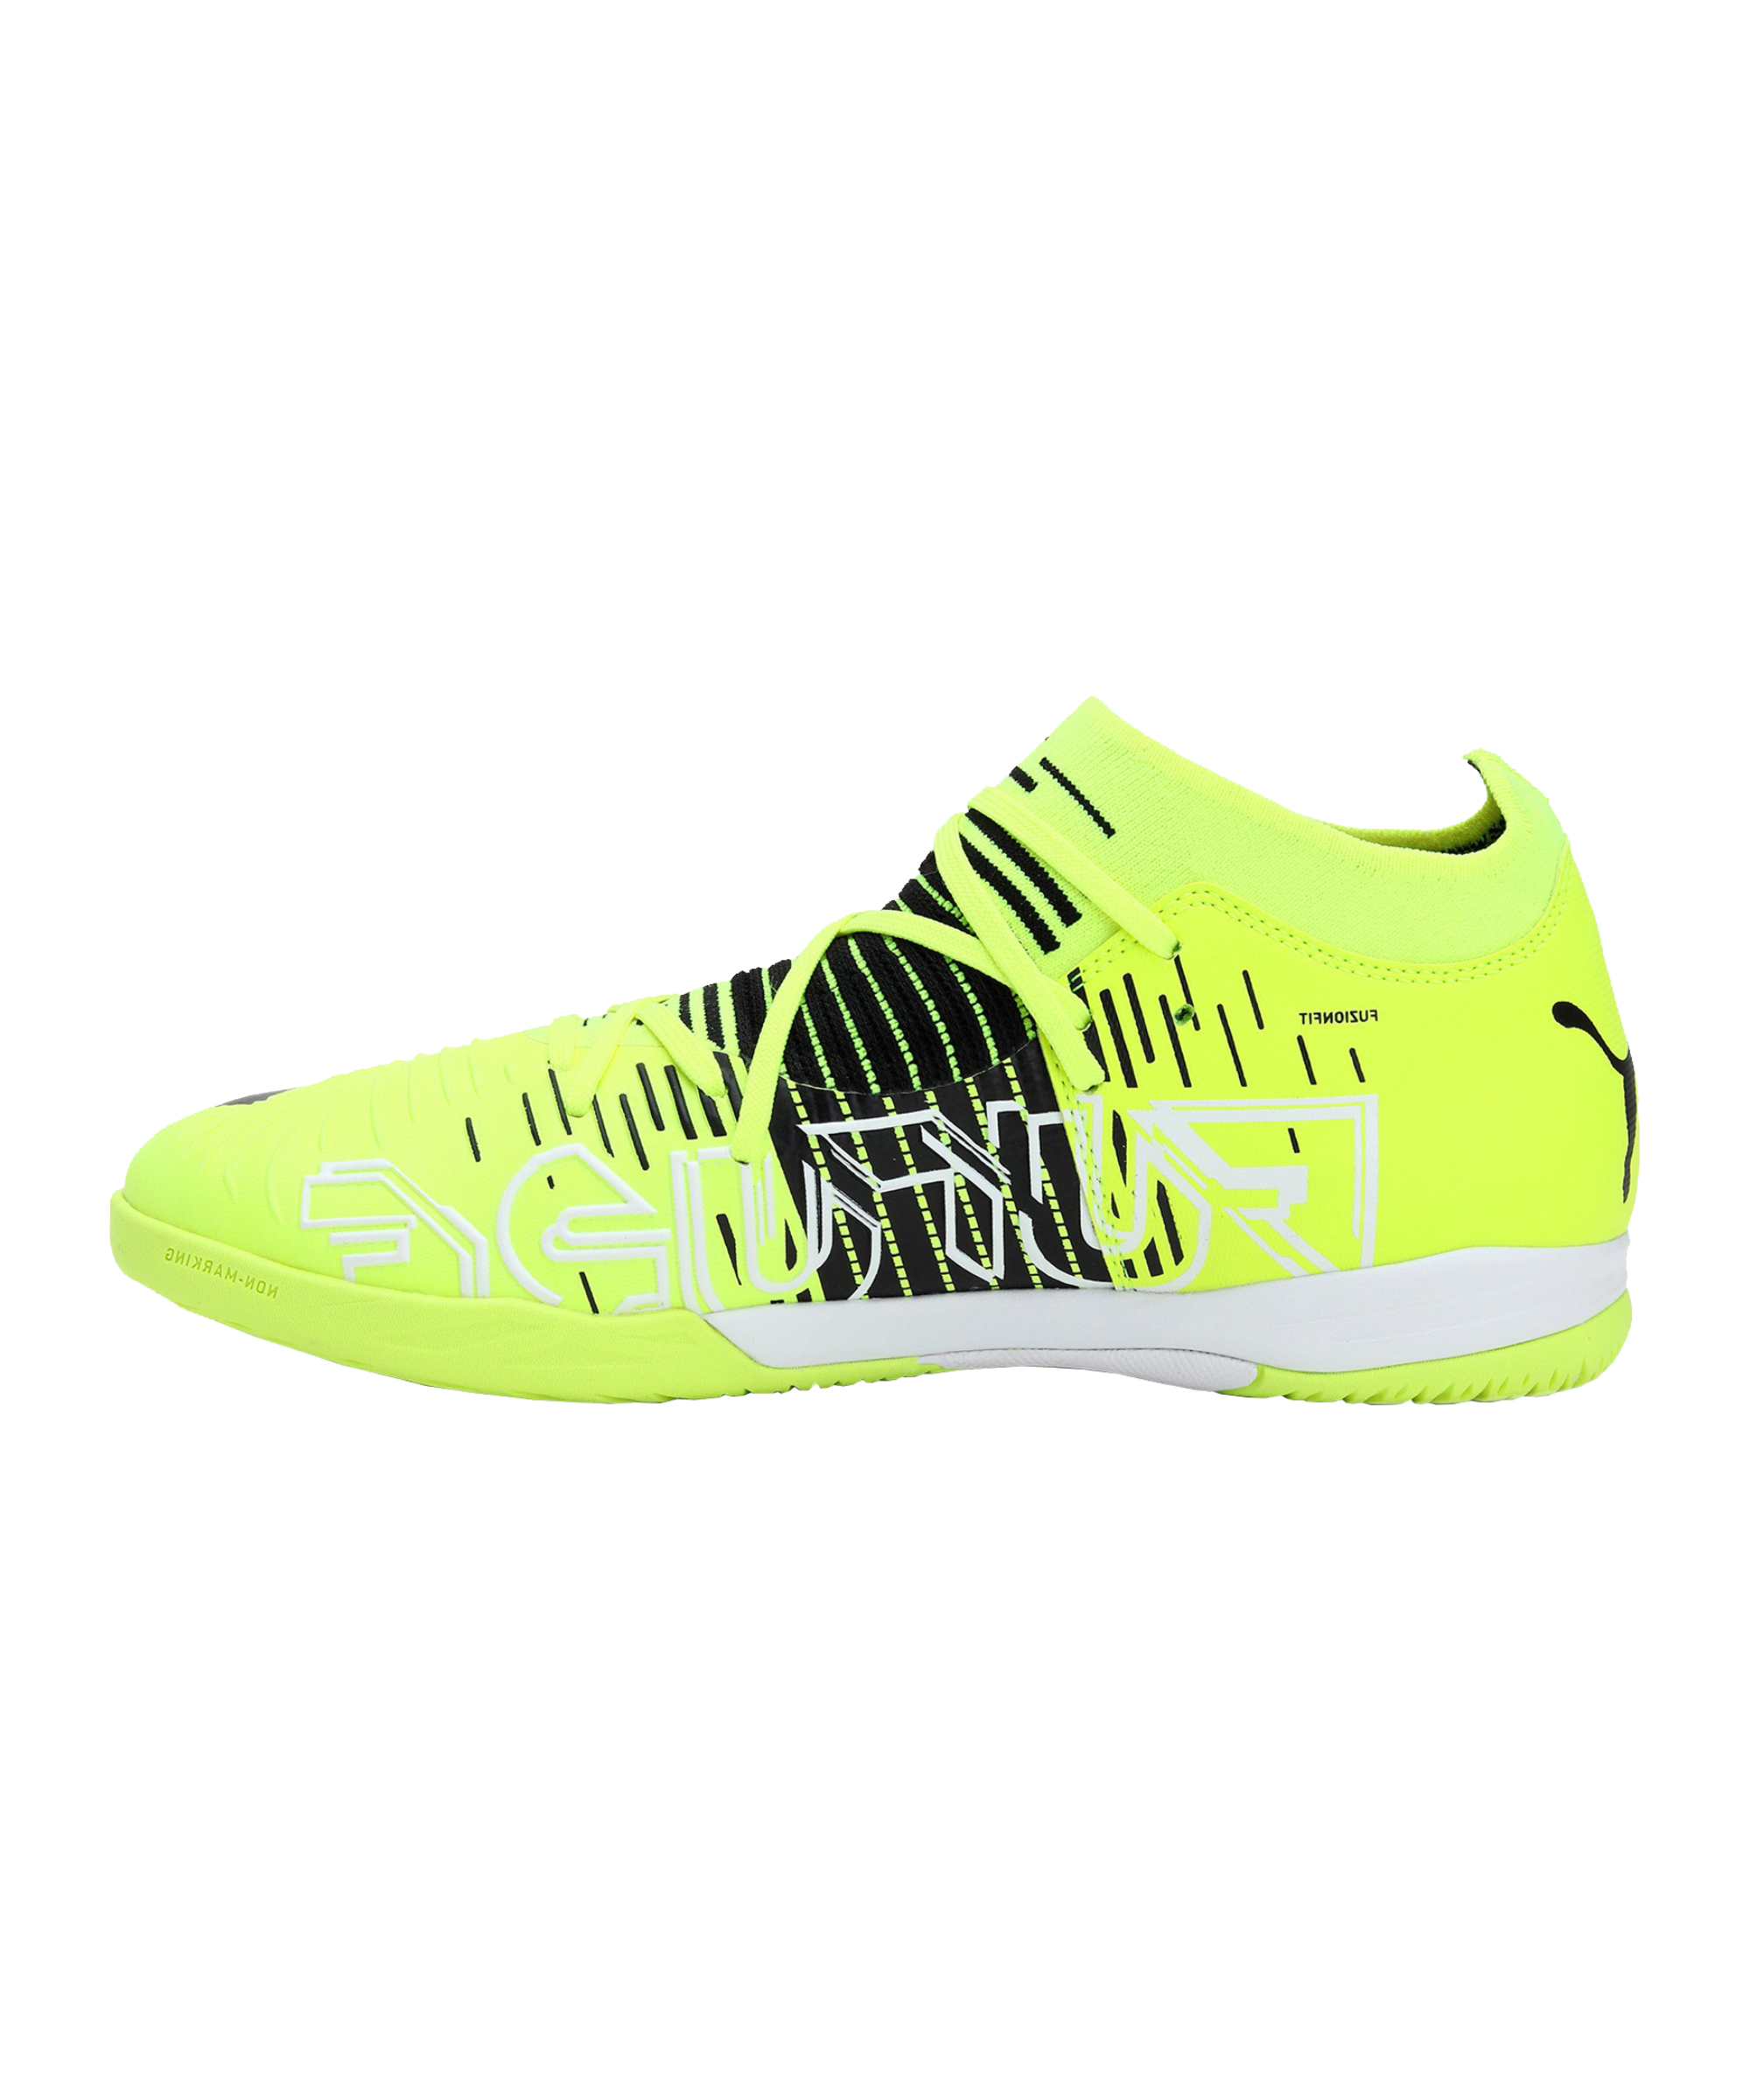 Puma Future Z 3 1 Game On It Indoor Yellow